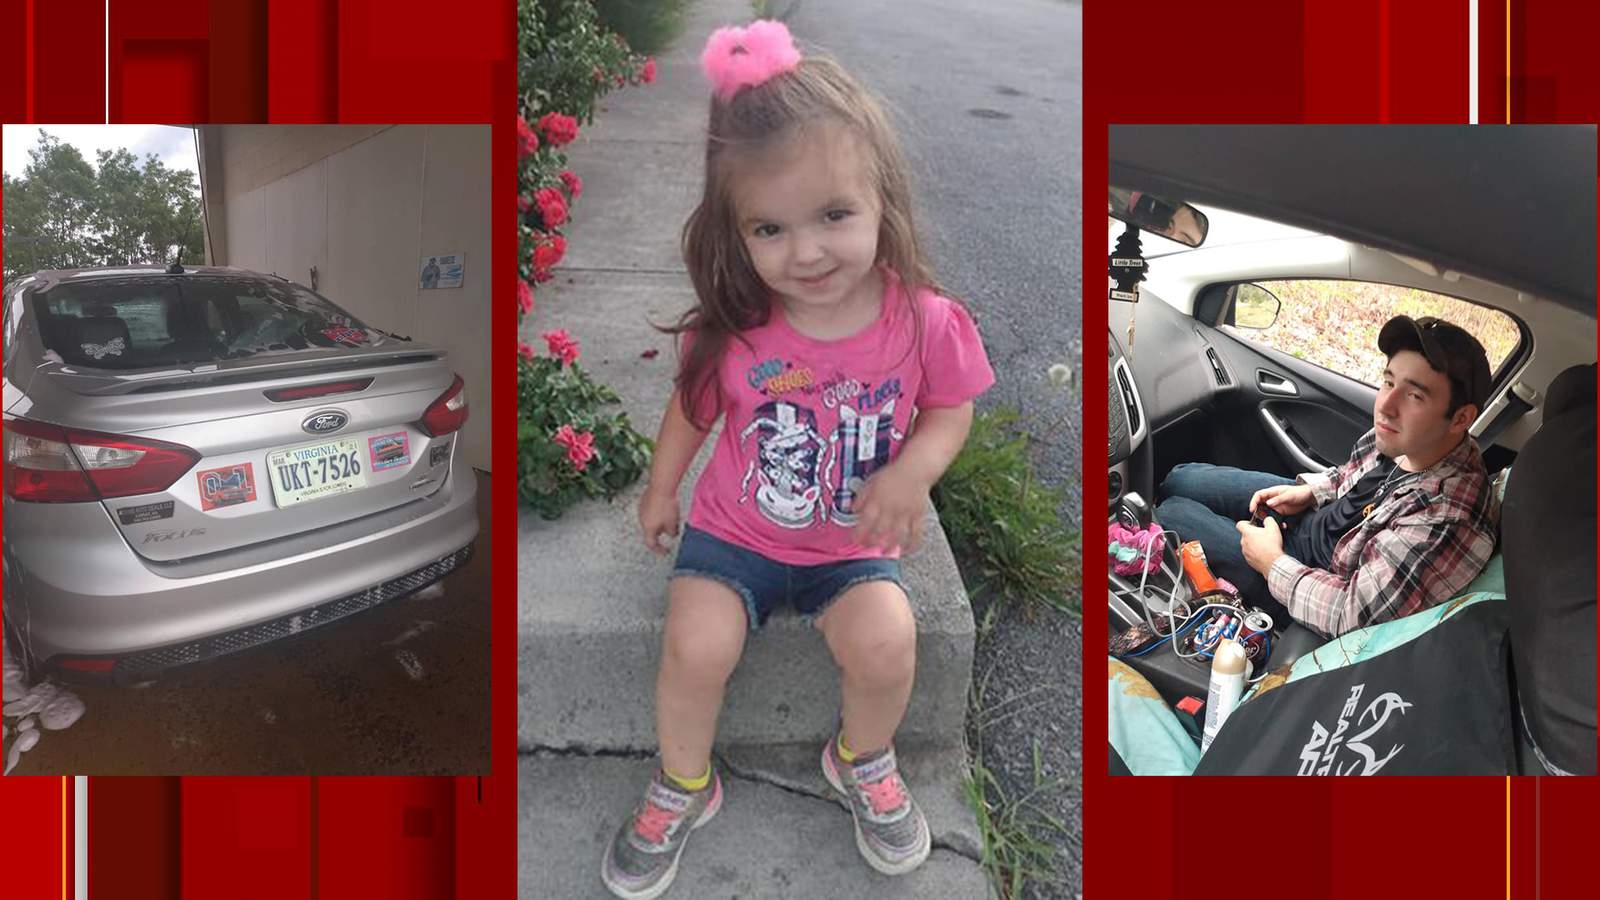 Authorities searching for missing 2-year-old Shenandoah Valley girl